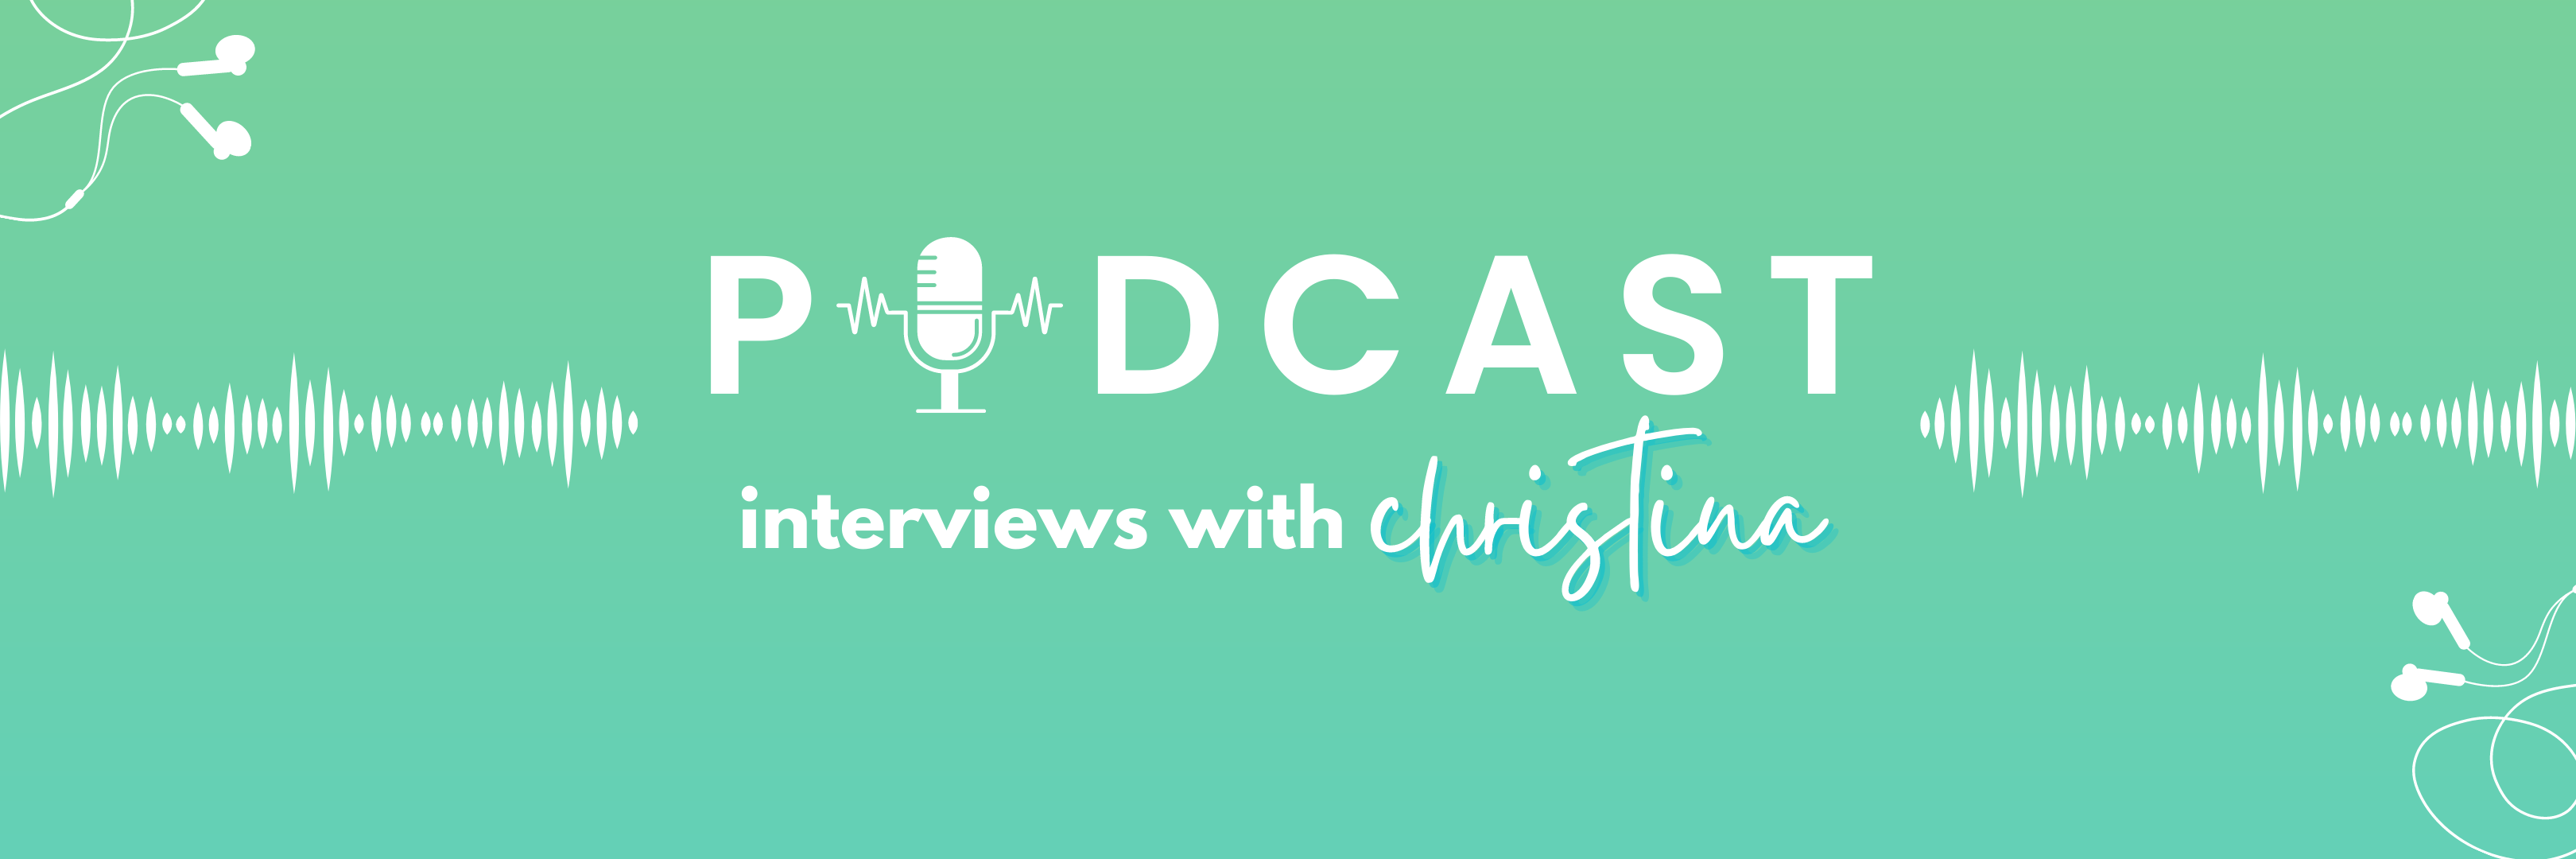 Podcast Interviews with Christina McGhee